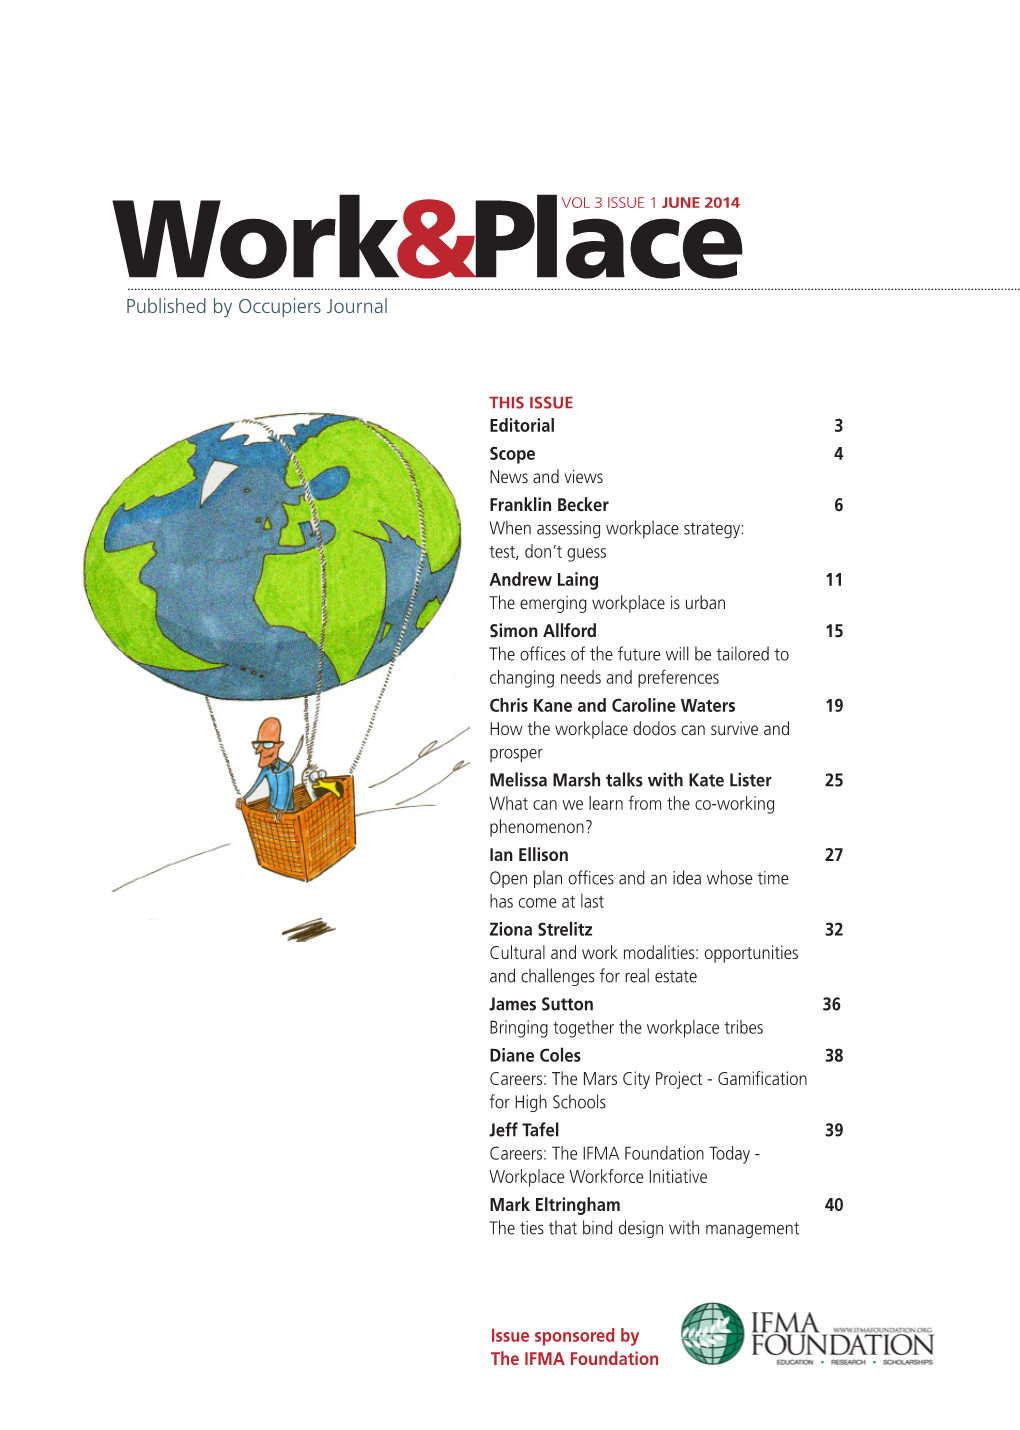 The New Issue of Work&Place Is Now Available To